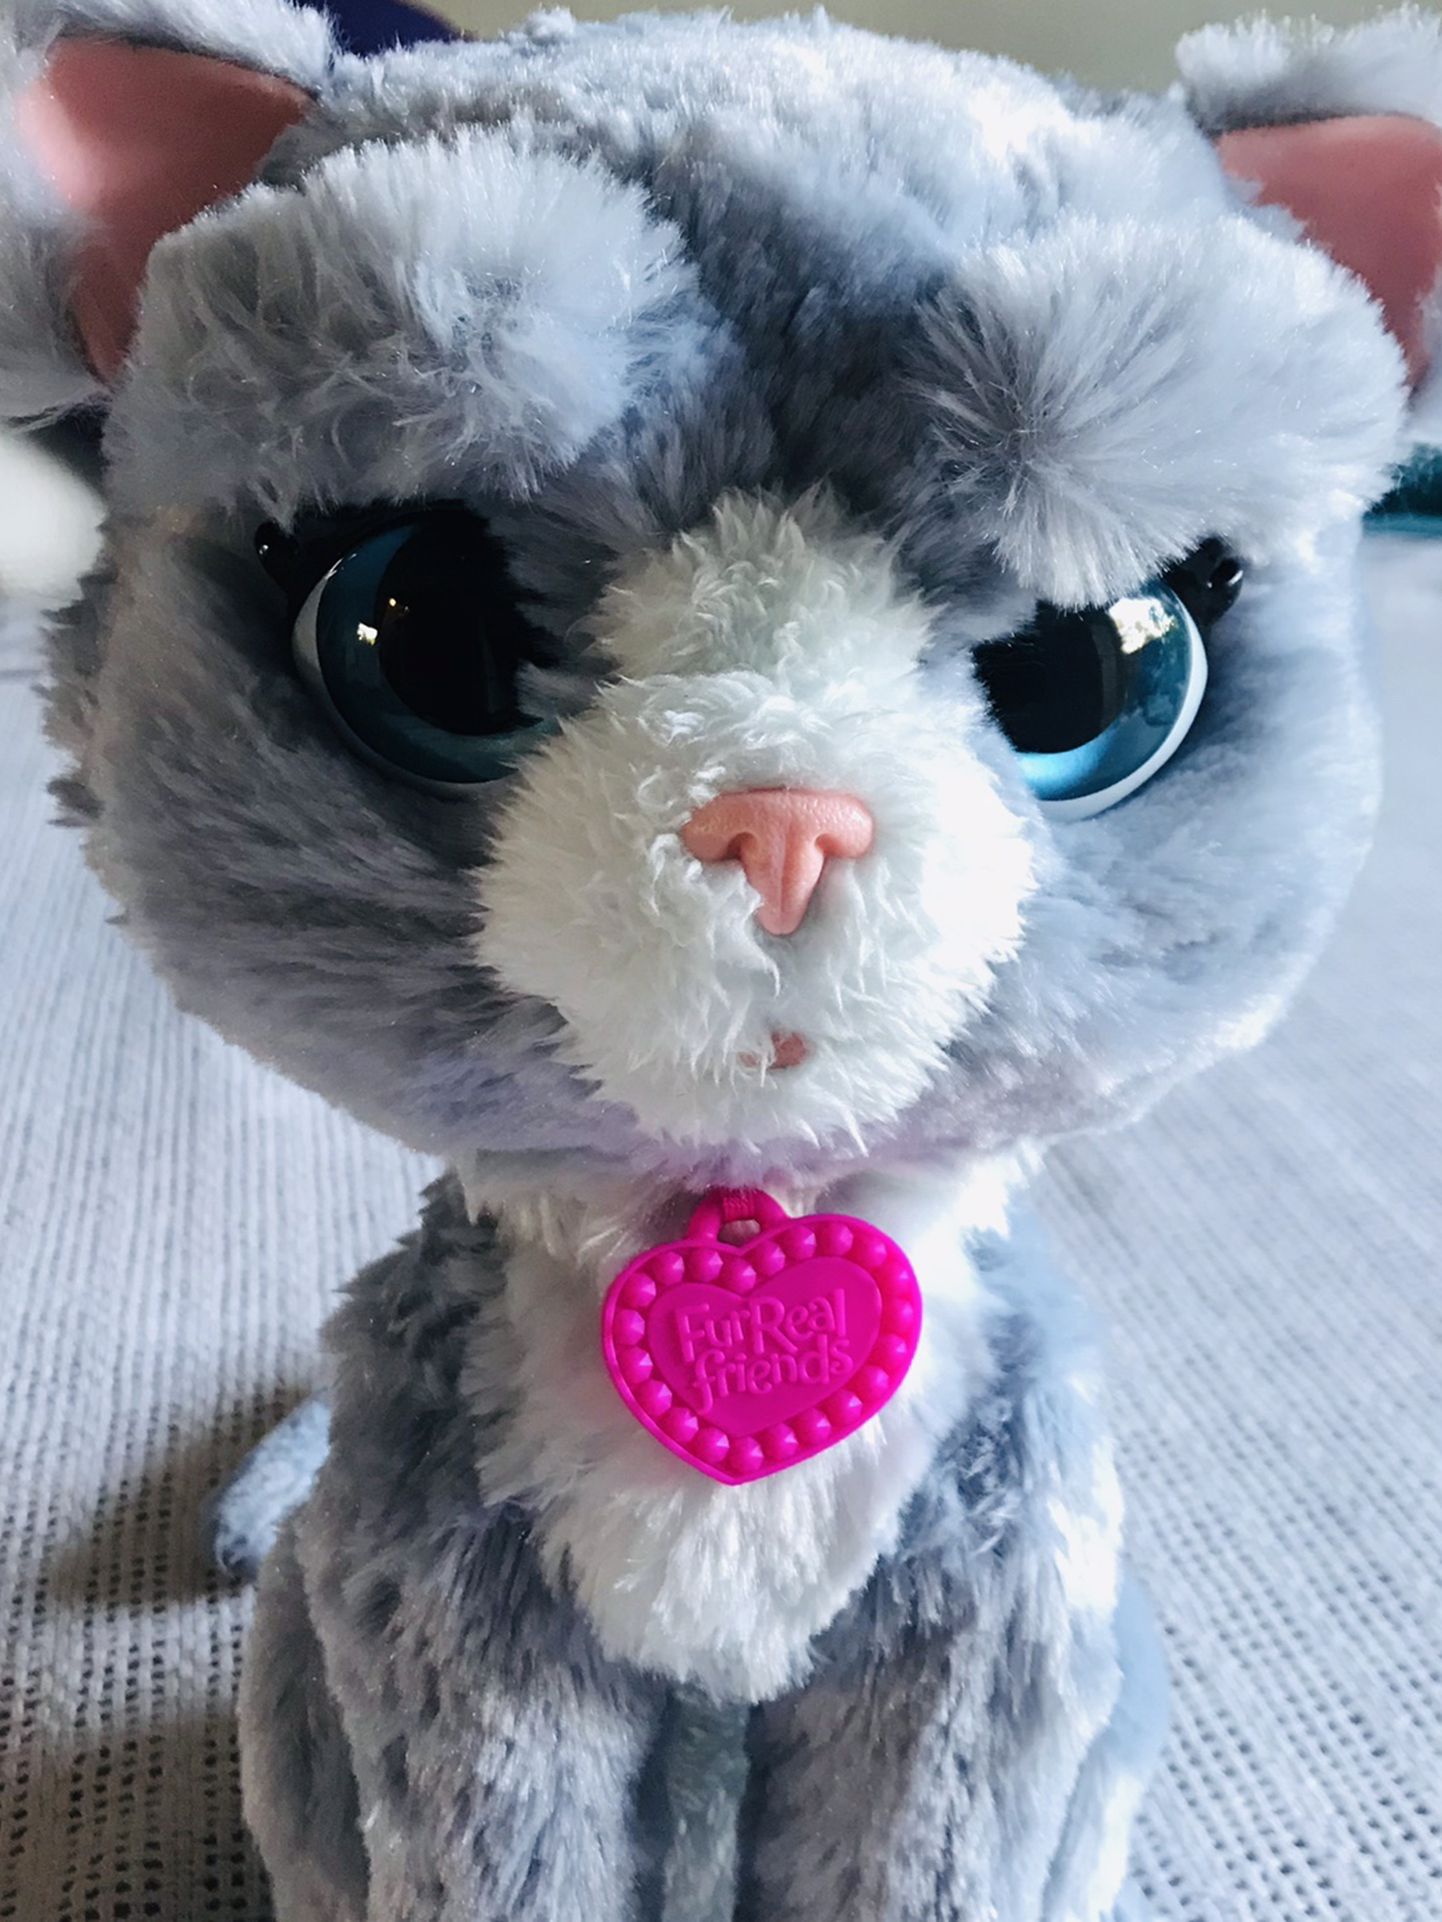 FurReal Friends Bootsie Cat Battery Operated Cute Silly Toy Cat With Sounds And Movement Very Entertaining And Fun